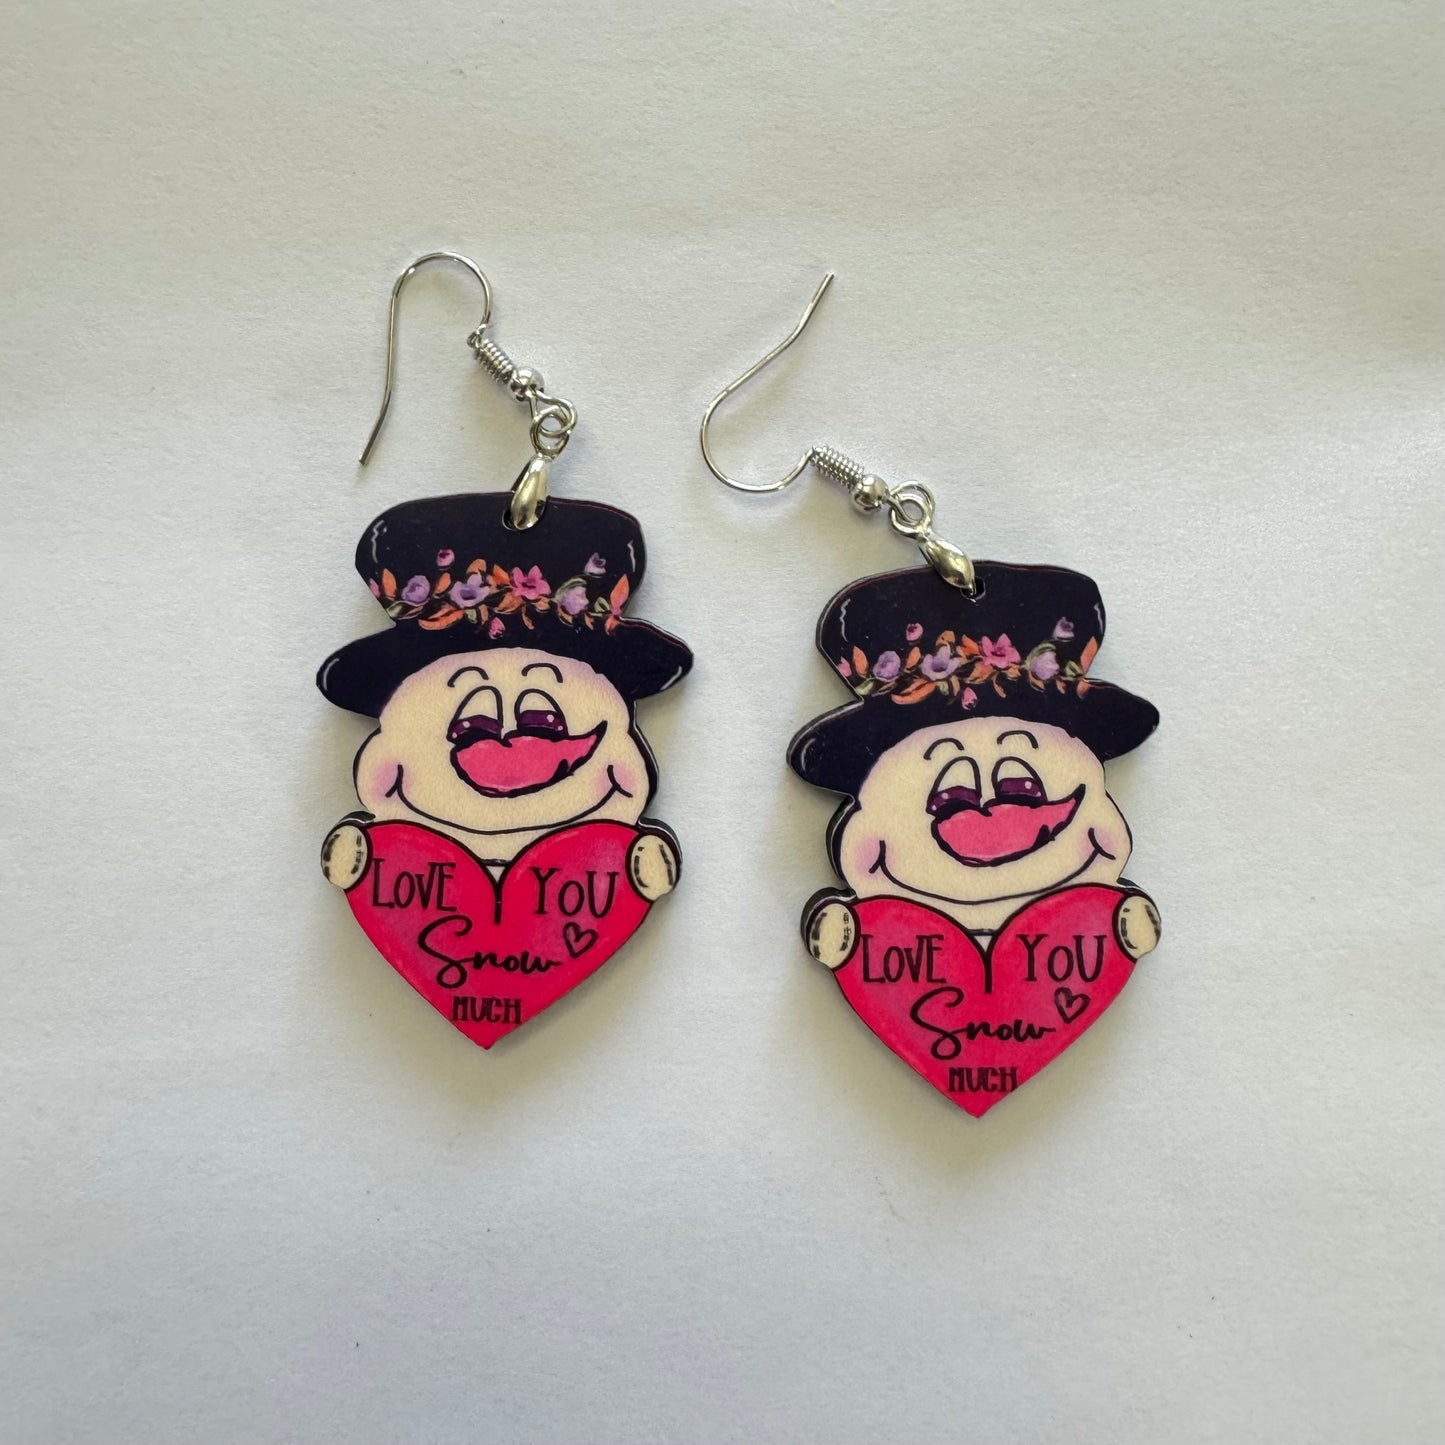 Love You Snowman Finished Earring